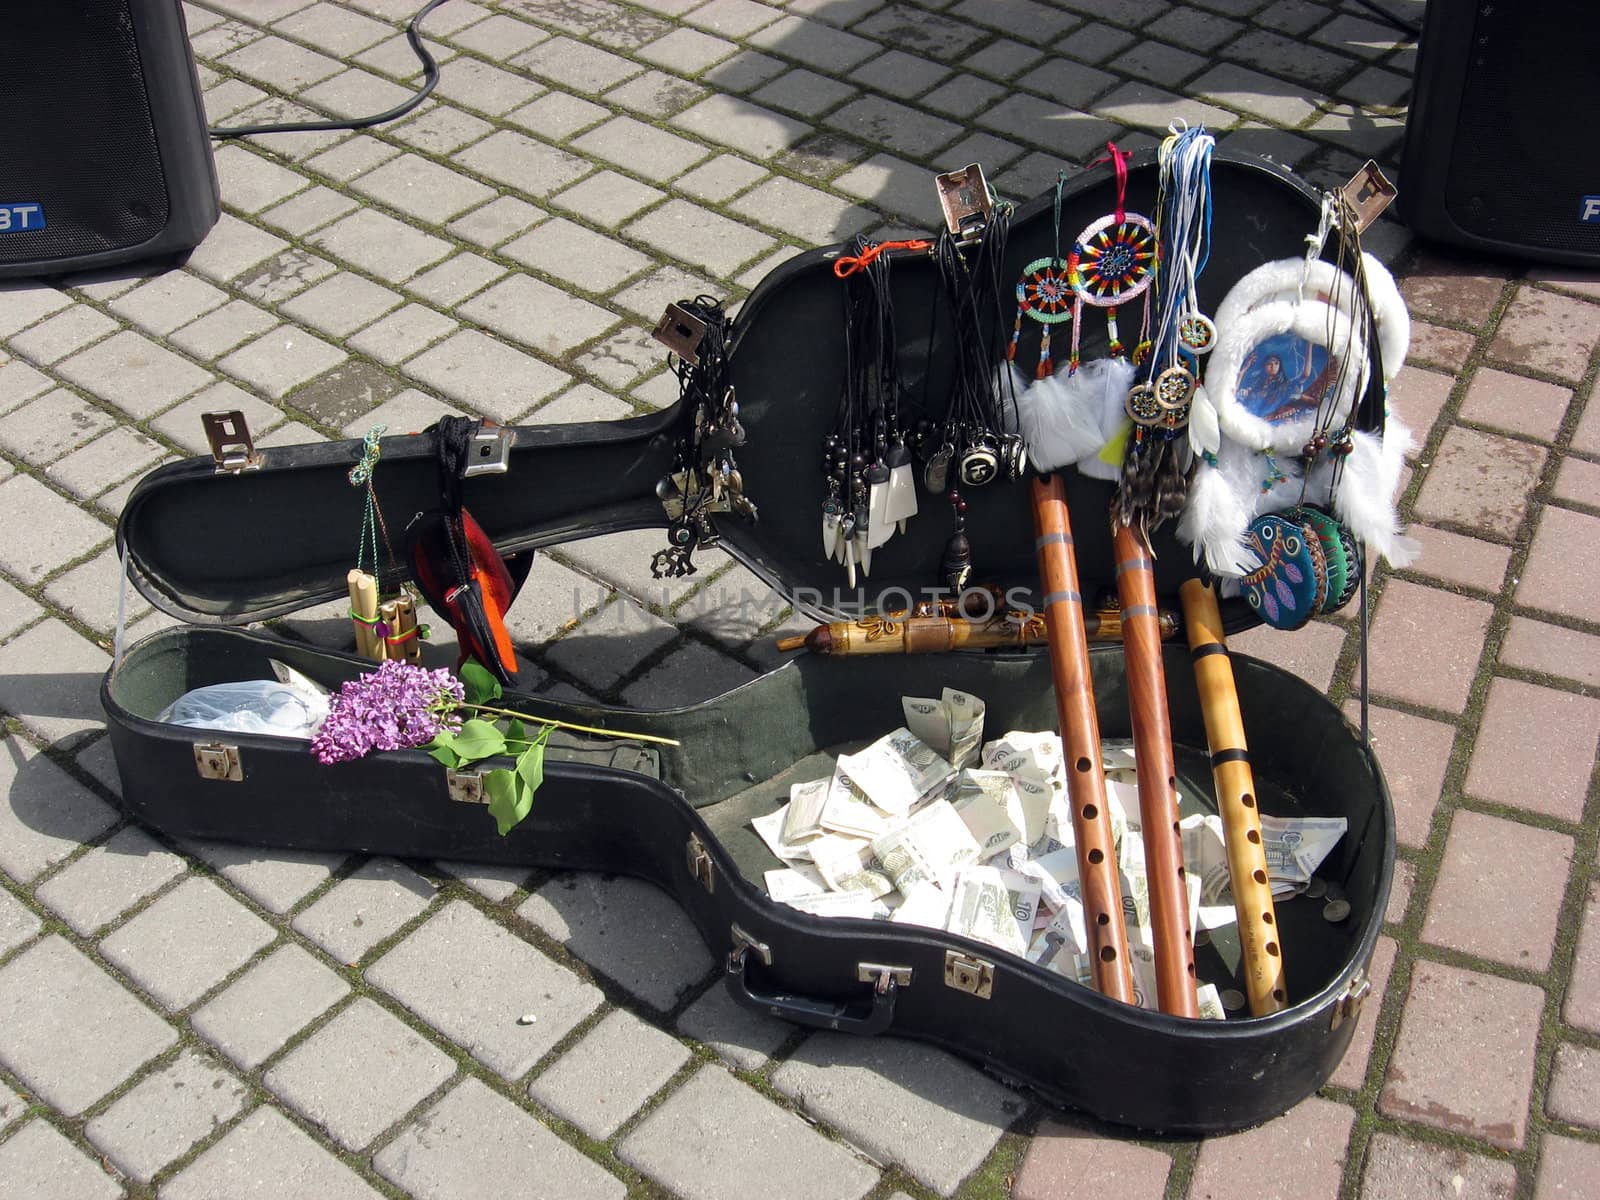 Case of a guitar with musical instruments and money